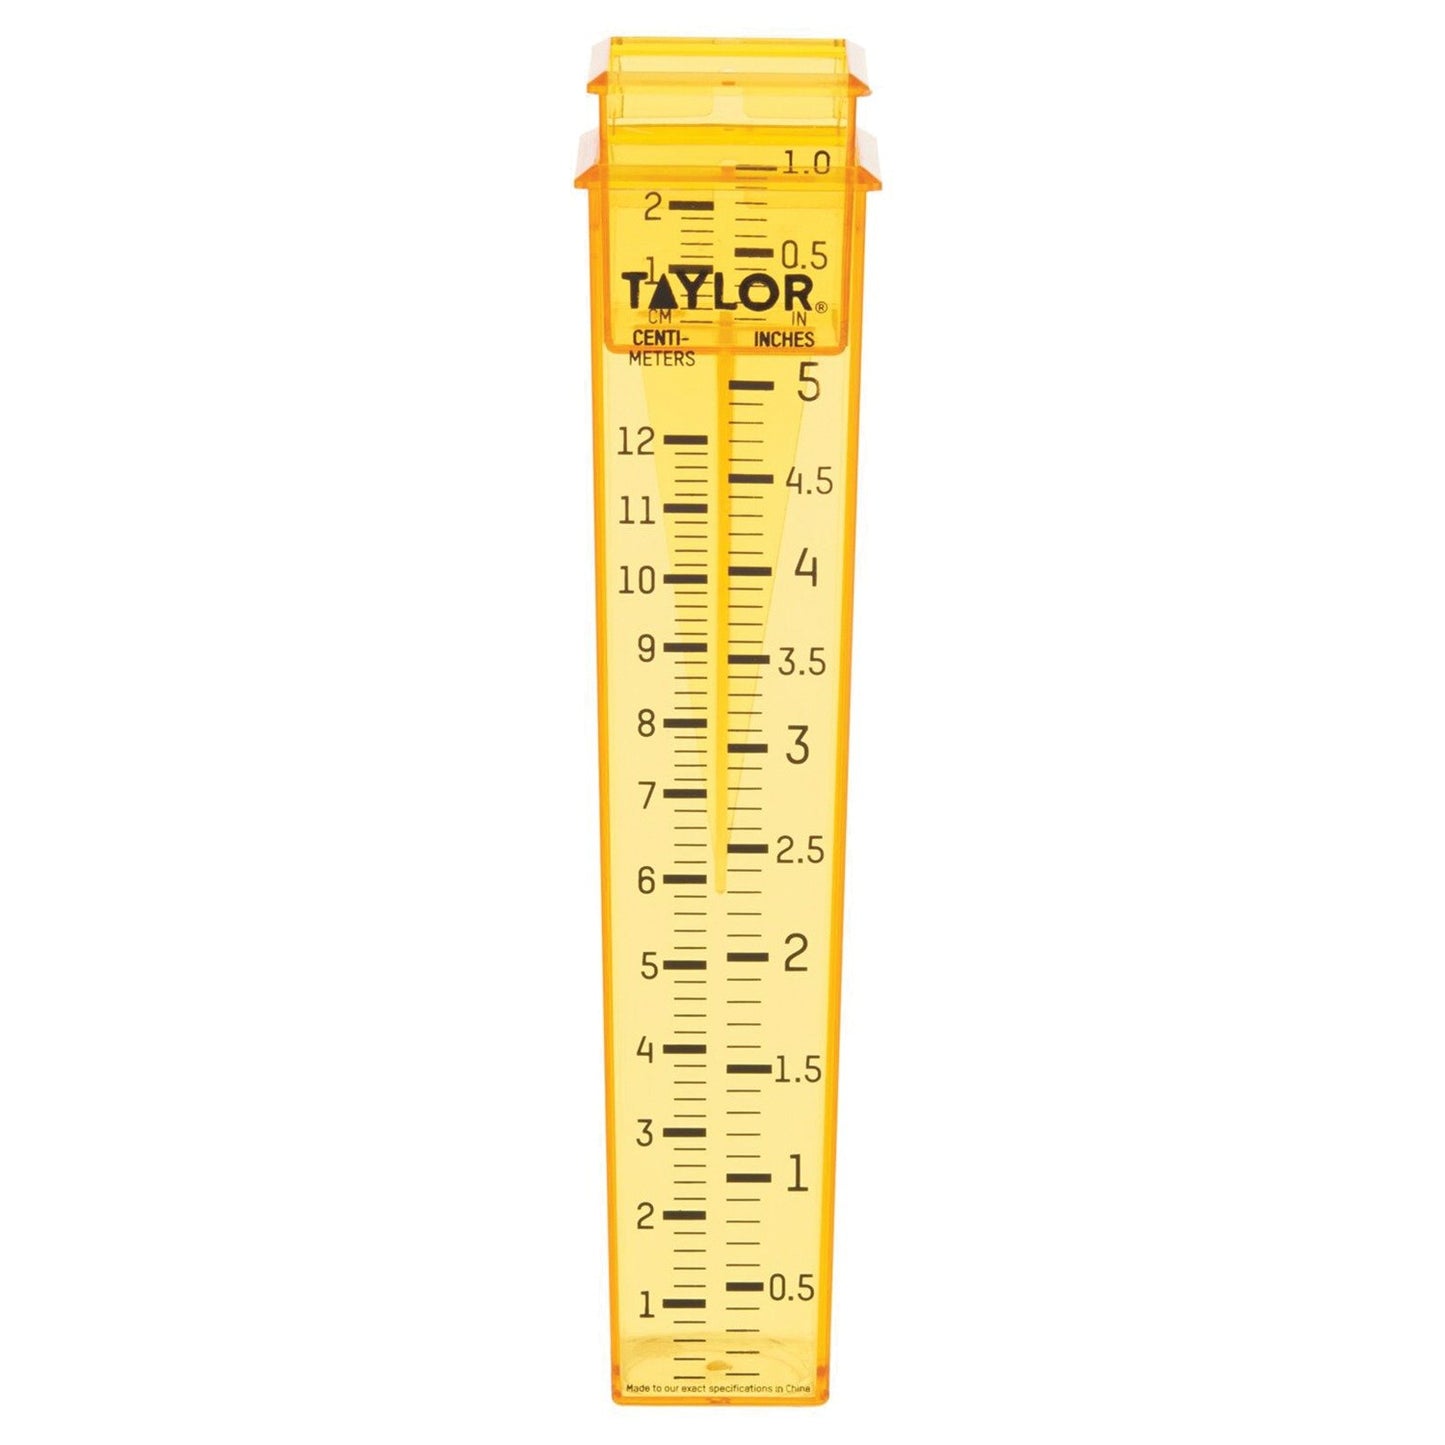 Taylor Precision Products 2715 2-in-1 Rain and Sprinkler Gauge